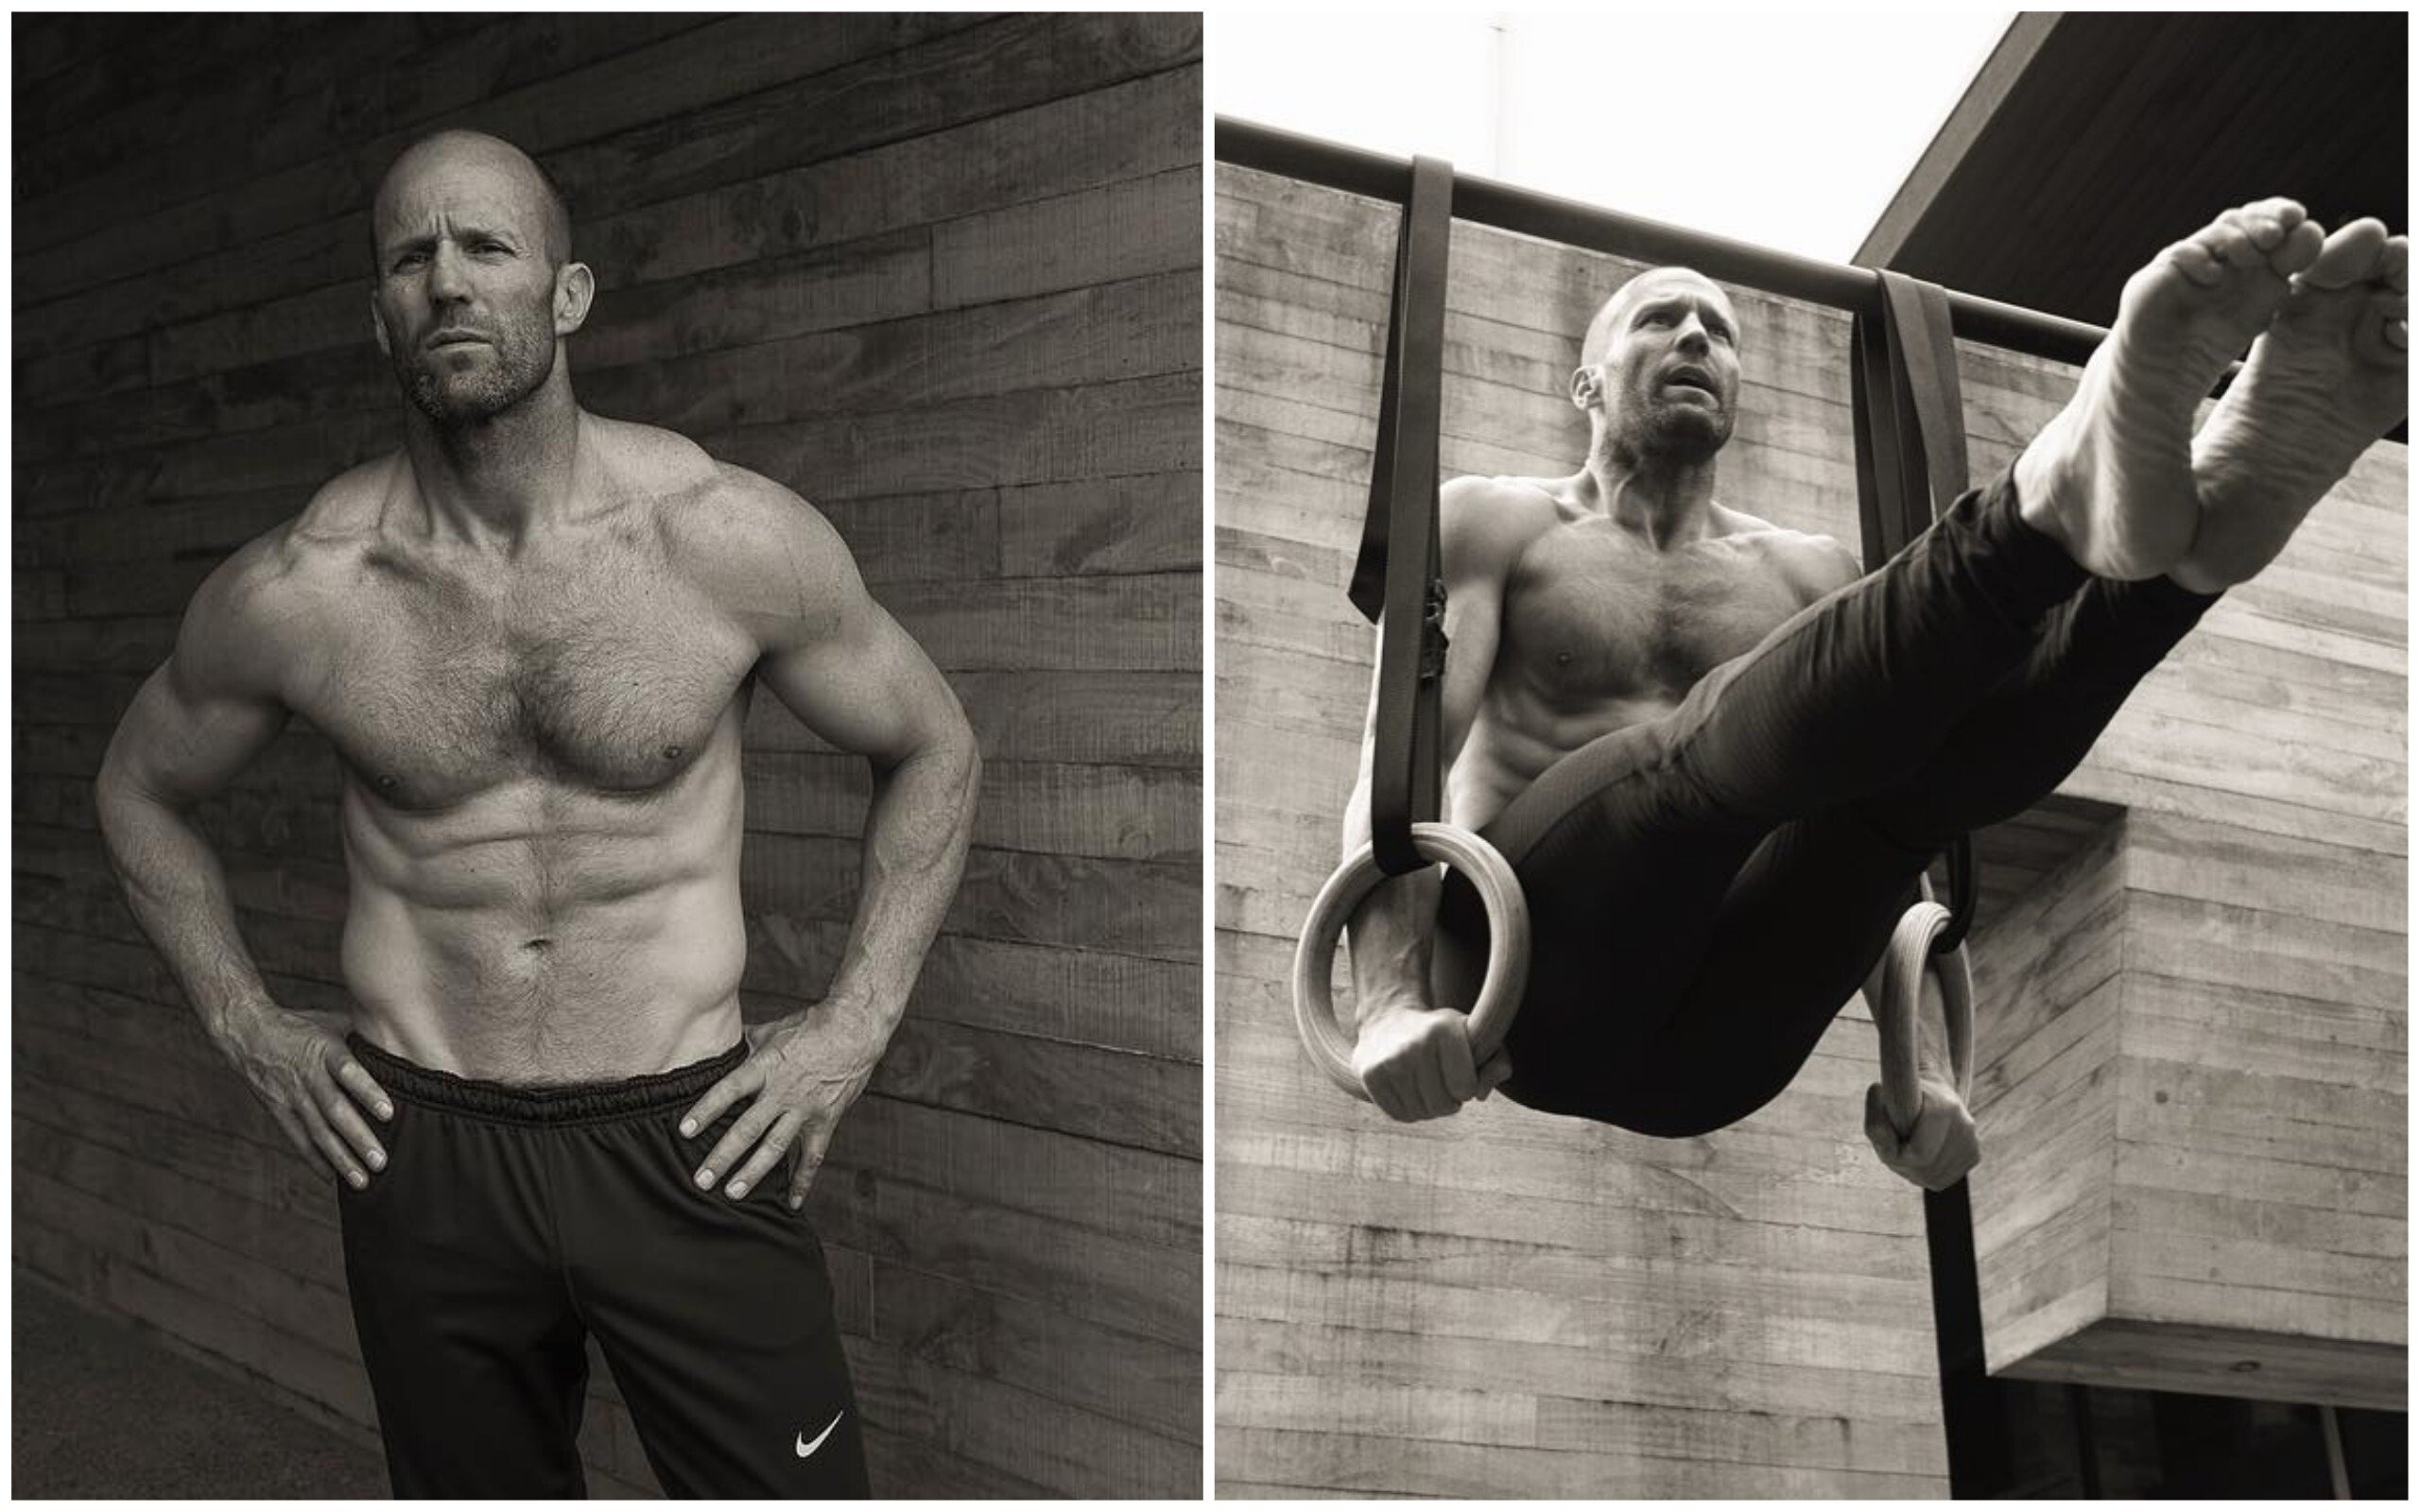 Jason Statham used to be a diver who competed in the Commonwealth Games – which other athletes turned to acting? Photo: @jasonstatham/Instagram